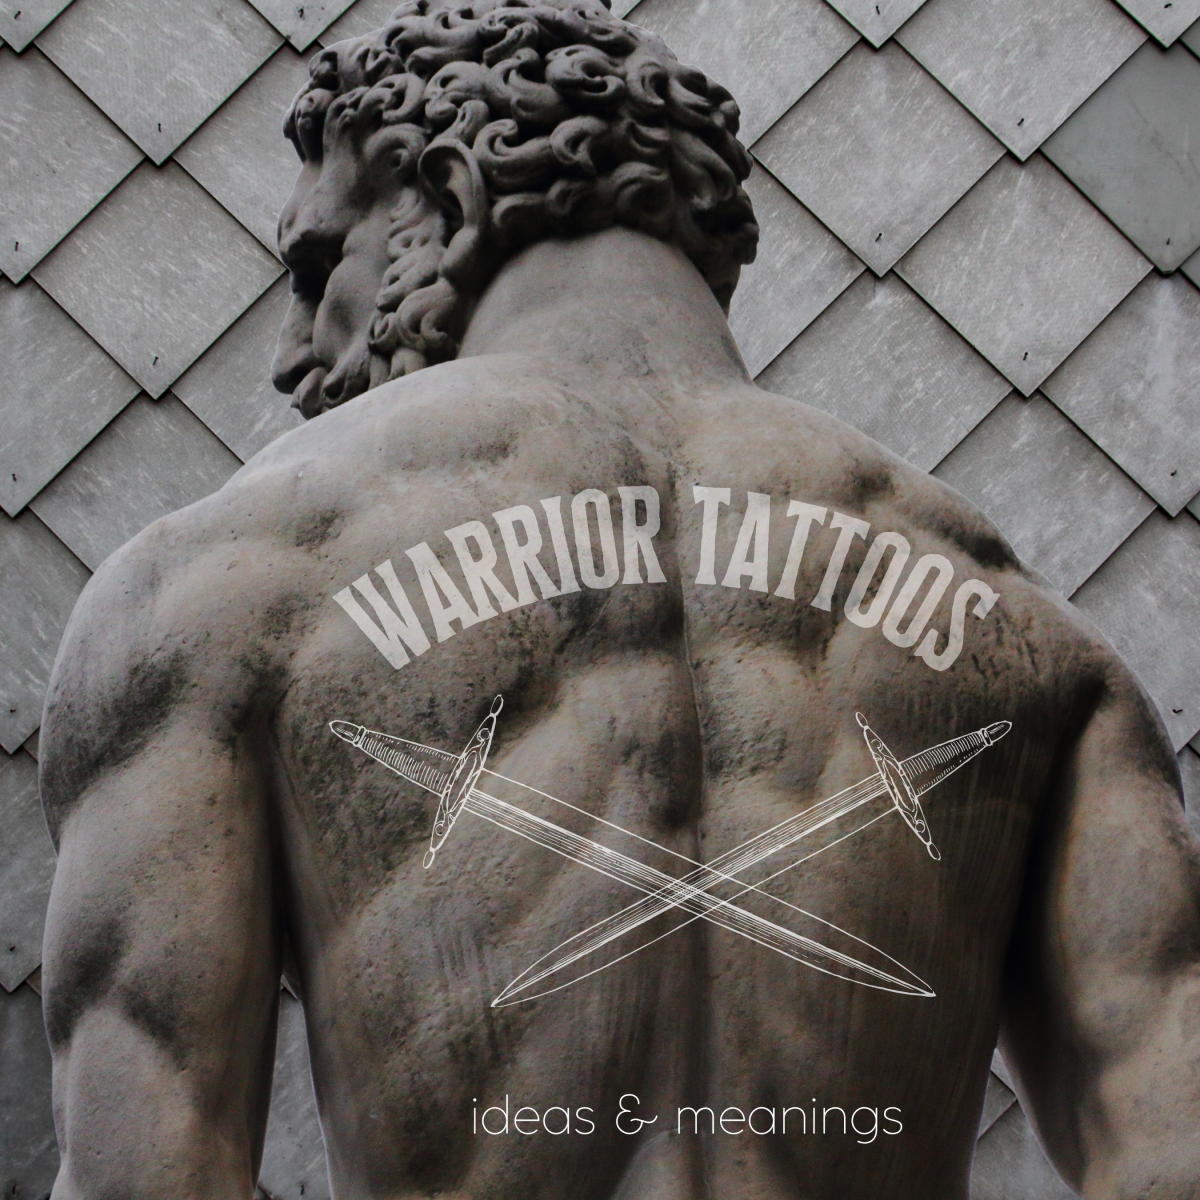 Warrior Tattoo Ideas, Meanings, and Inspiration